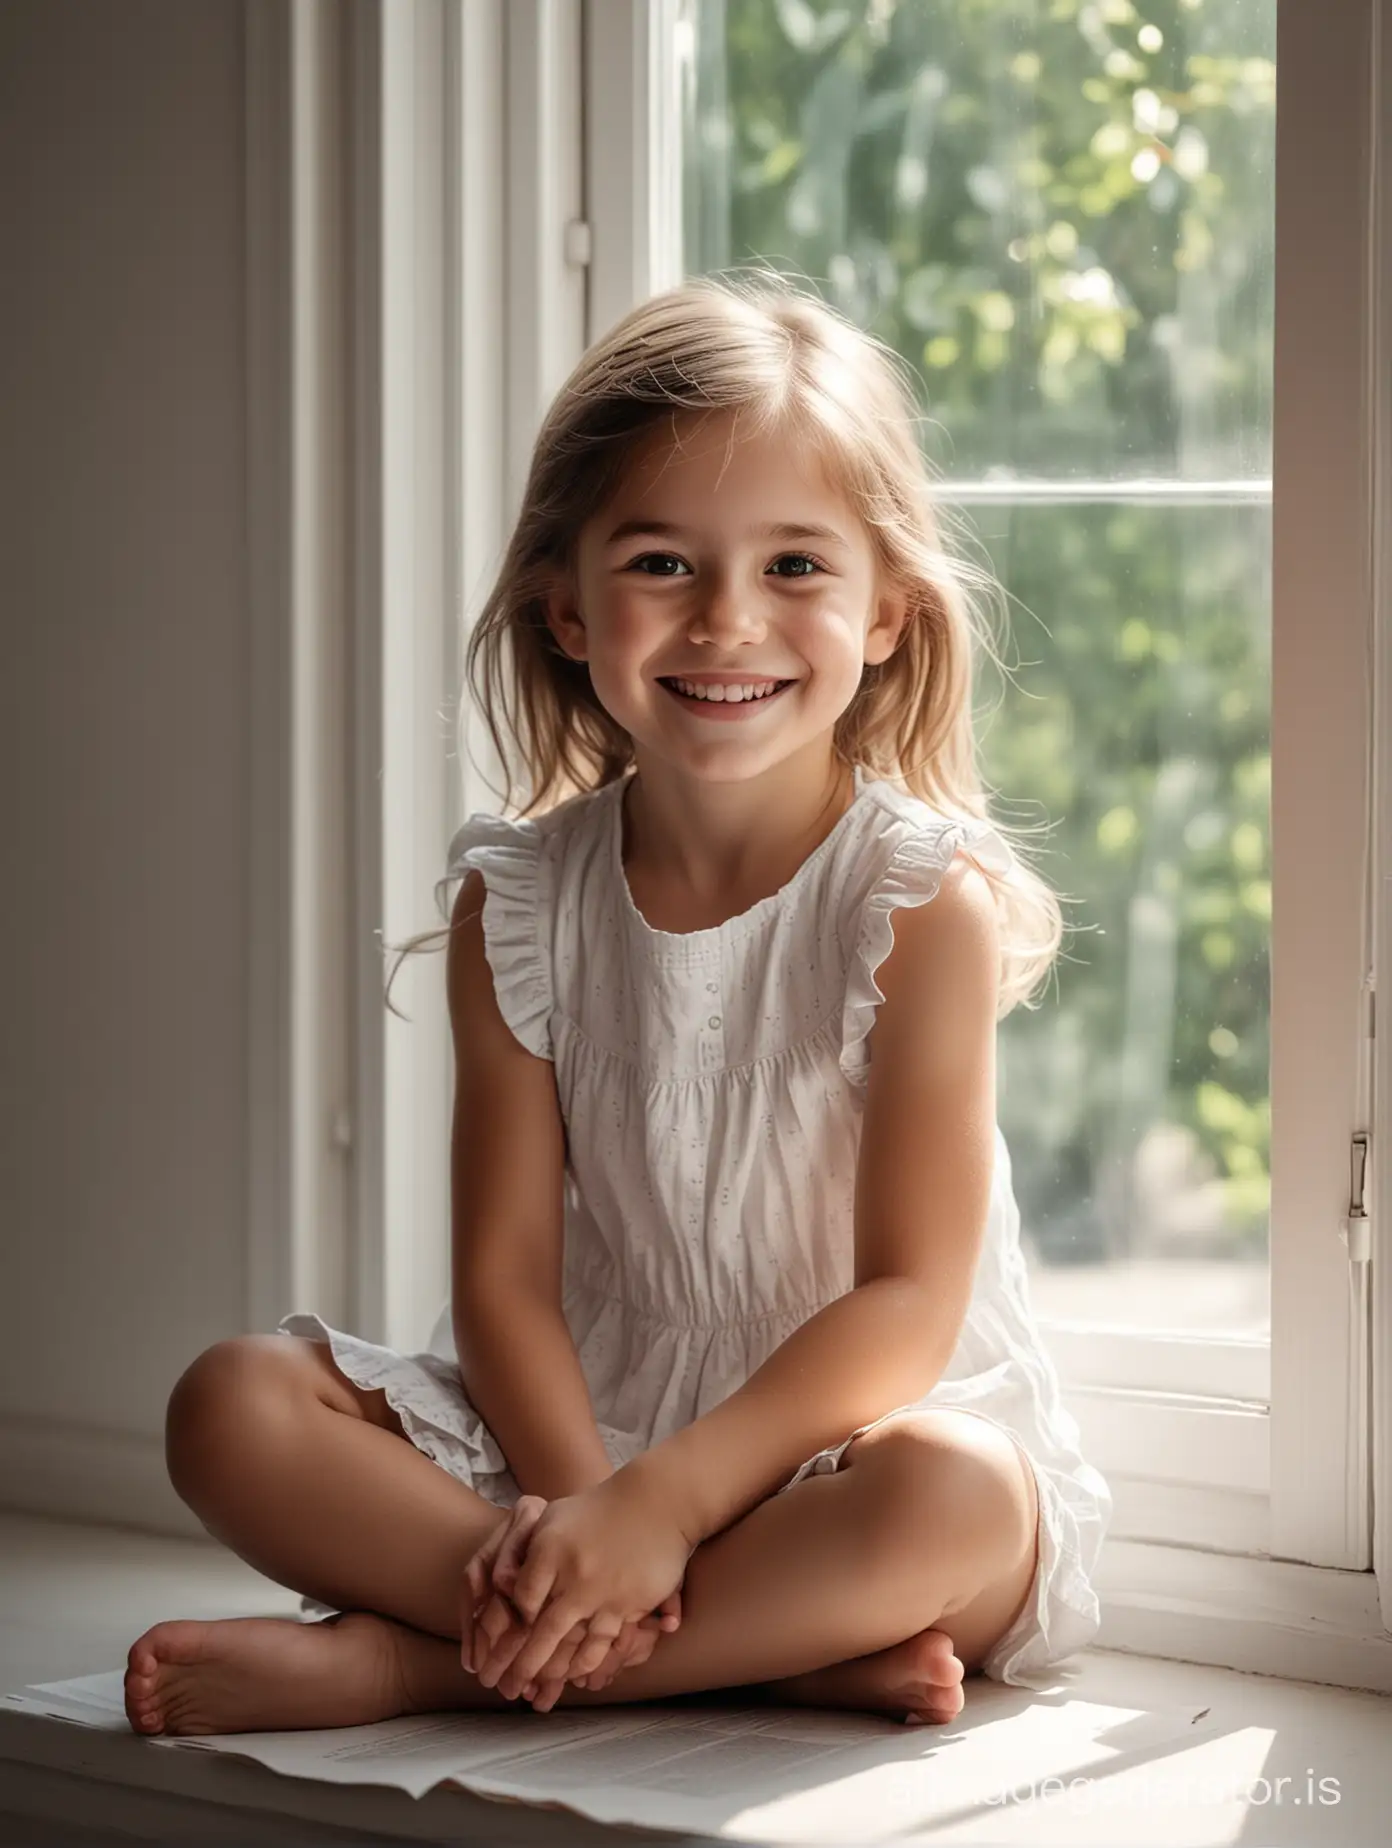 Smiling-Little-Girl-Portrait-by-Window-with-White-Paper-Photorealistic-Cinematic-Image